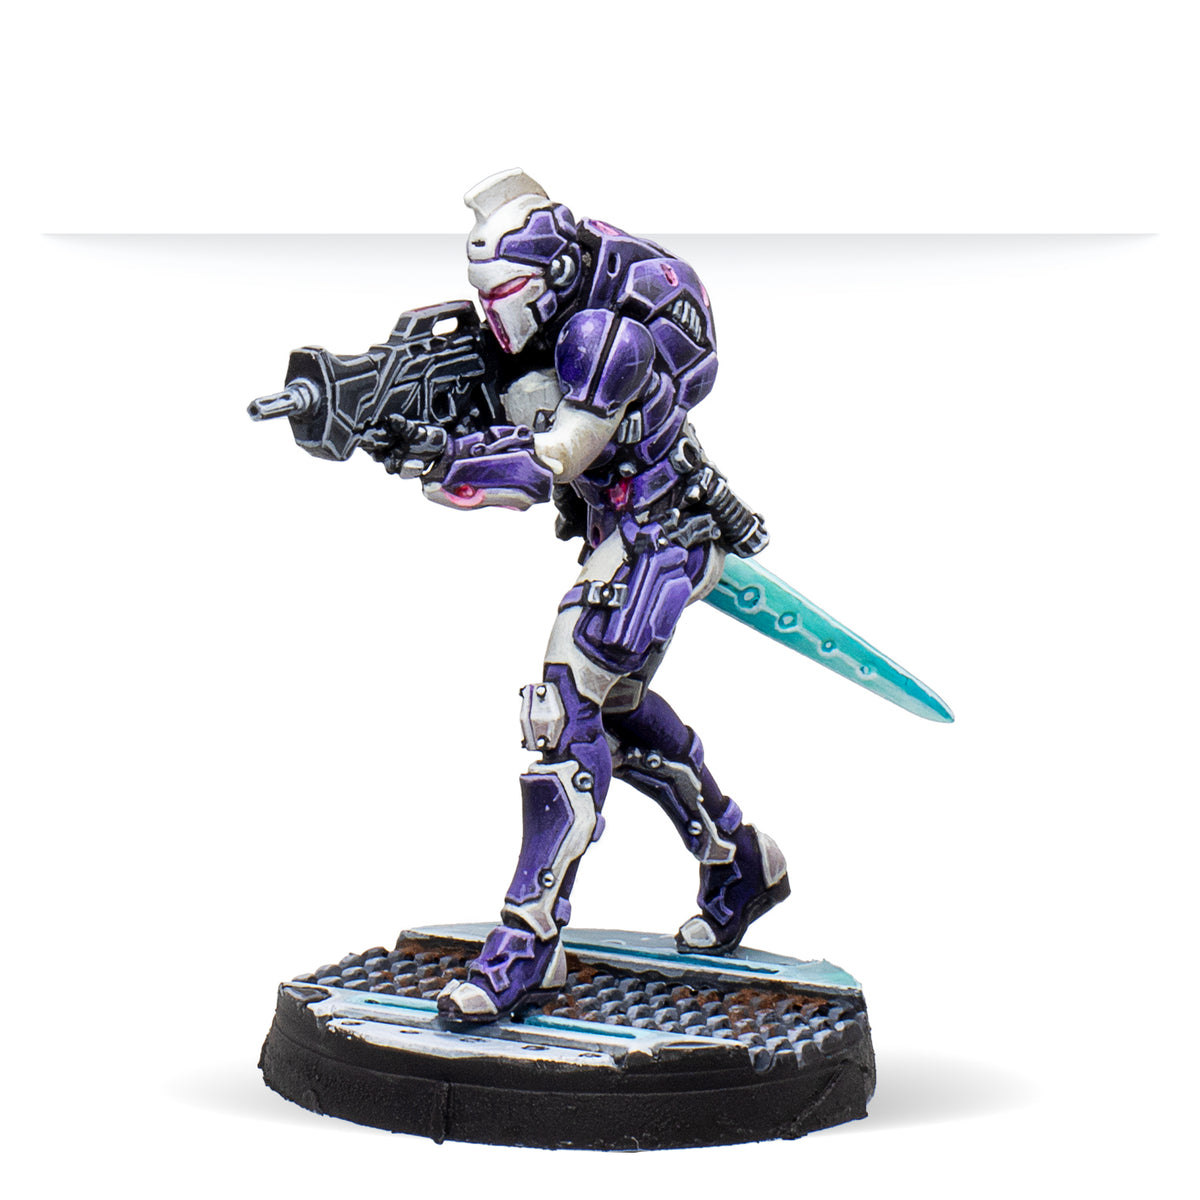 Paquete sectorial ALEPH Steel Phalanx [PUEDE RESERVAR]